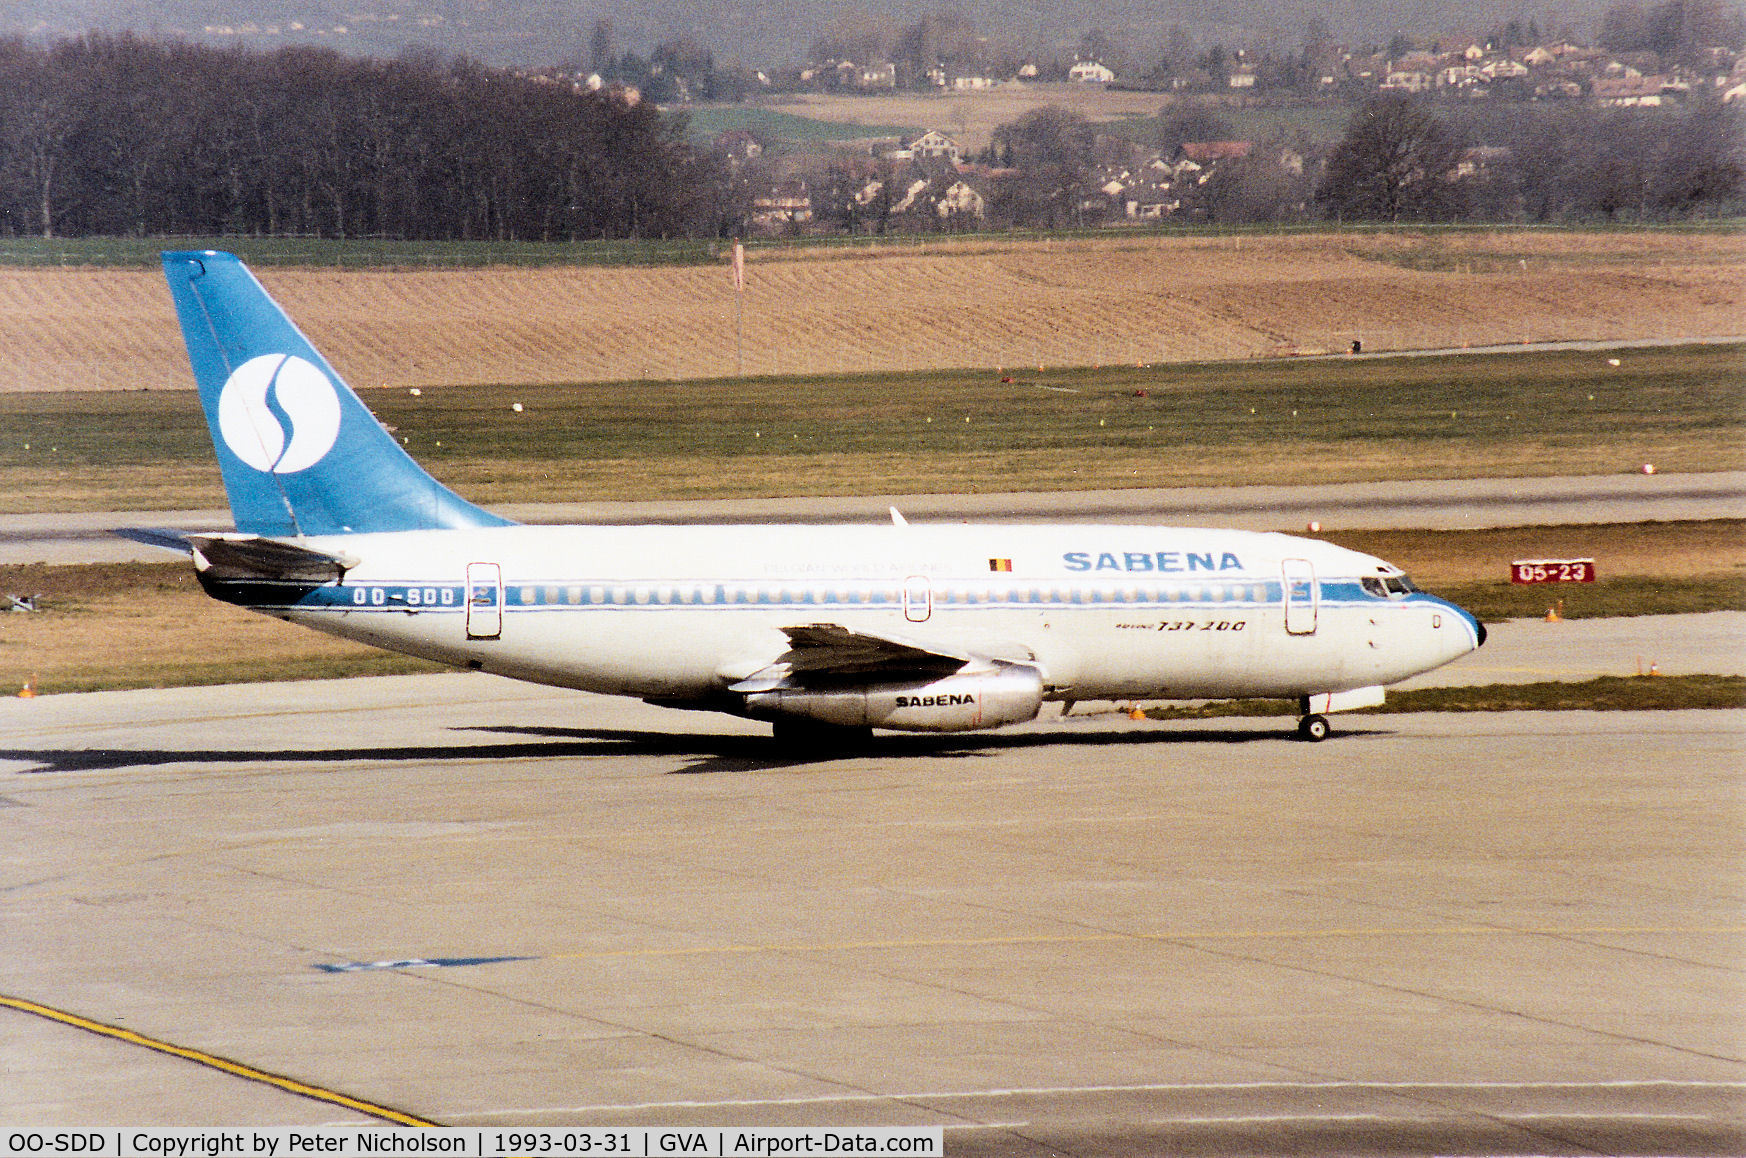 OO-SDD, 1974 Boeing 737-229 C/N 20910, Boeing 737-229 of Belgian airline Sabena heading for the active runway at Geneva in March 1993.